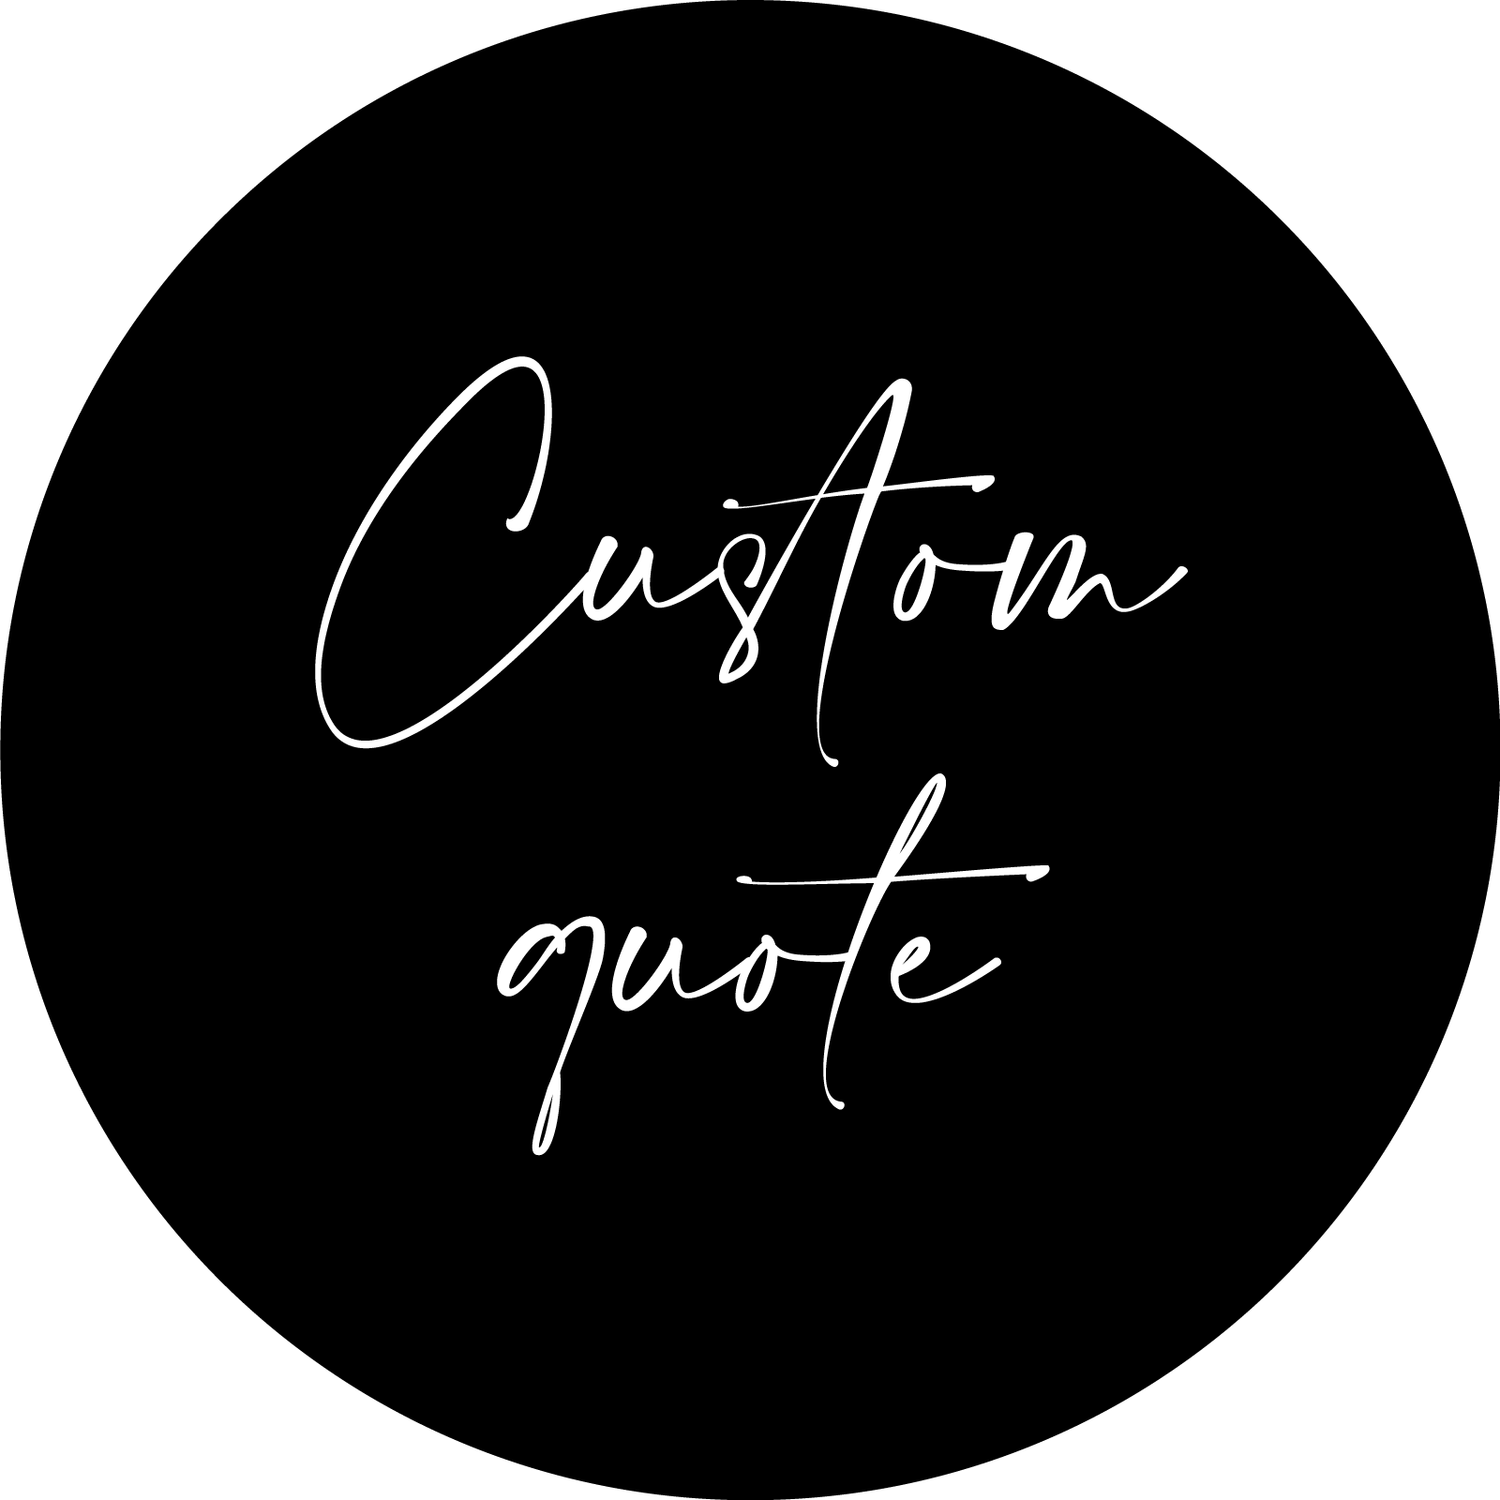 Custom Fabric Wall Decal Quote - 'Use your own' - A Creative Hart